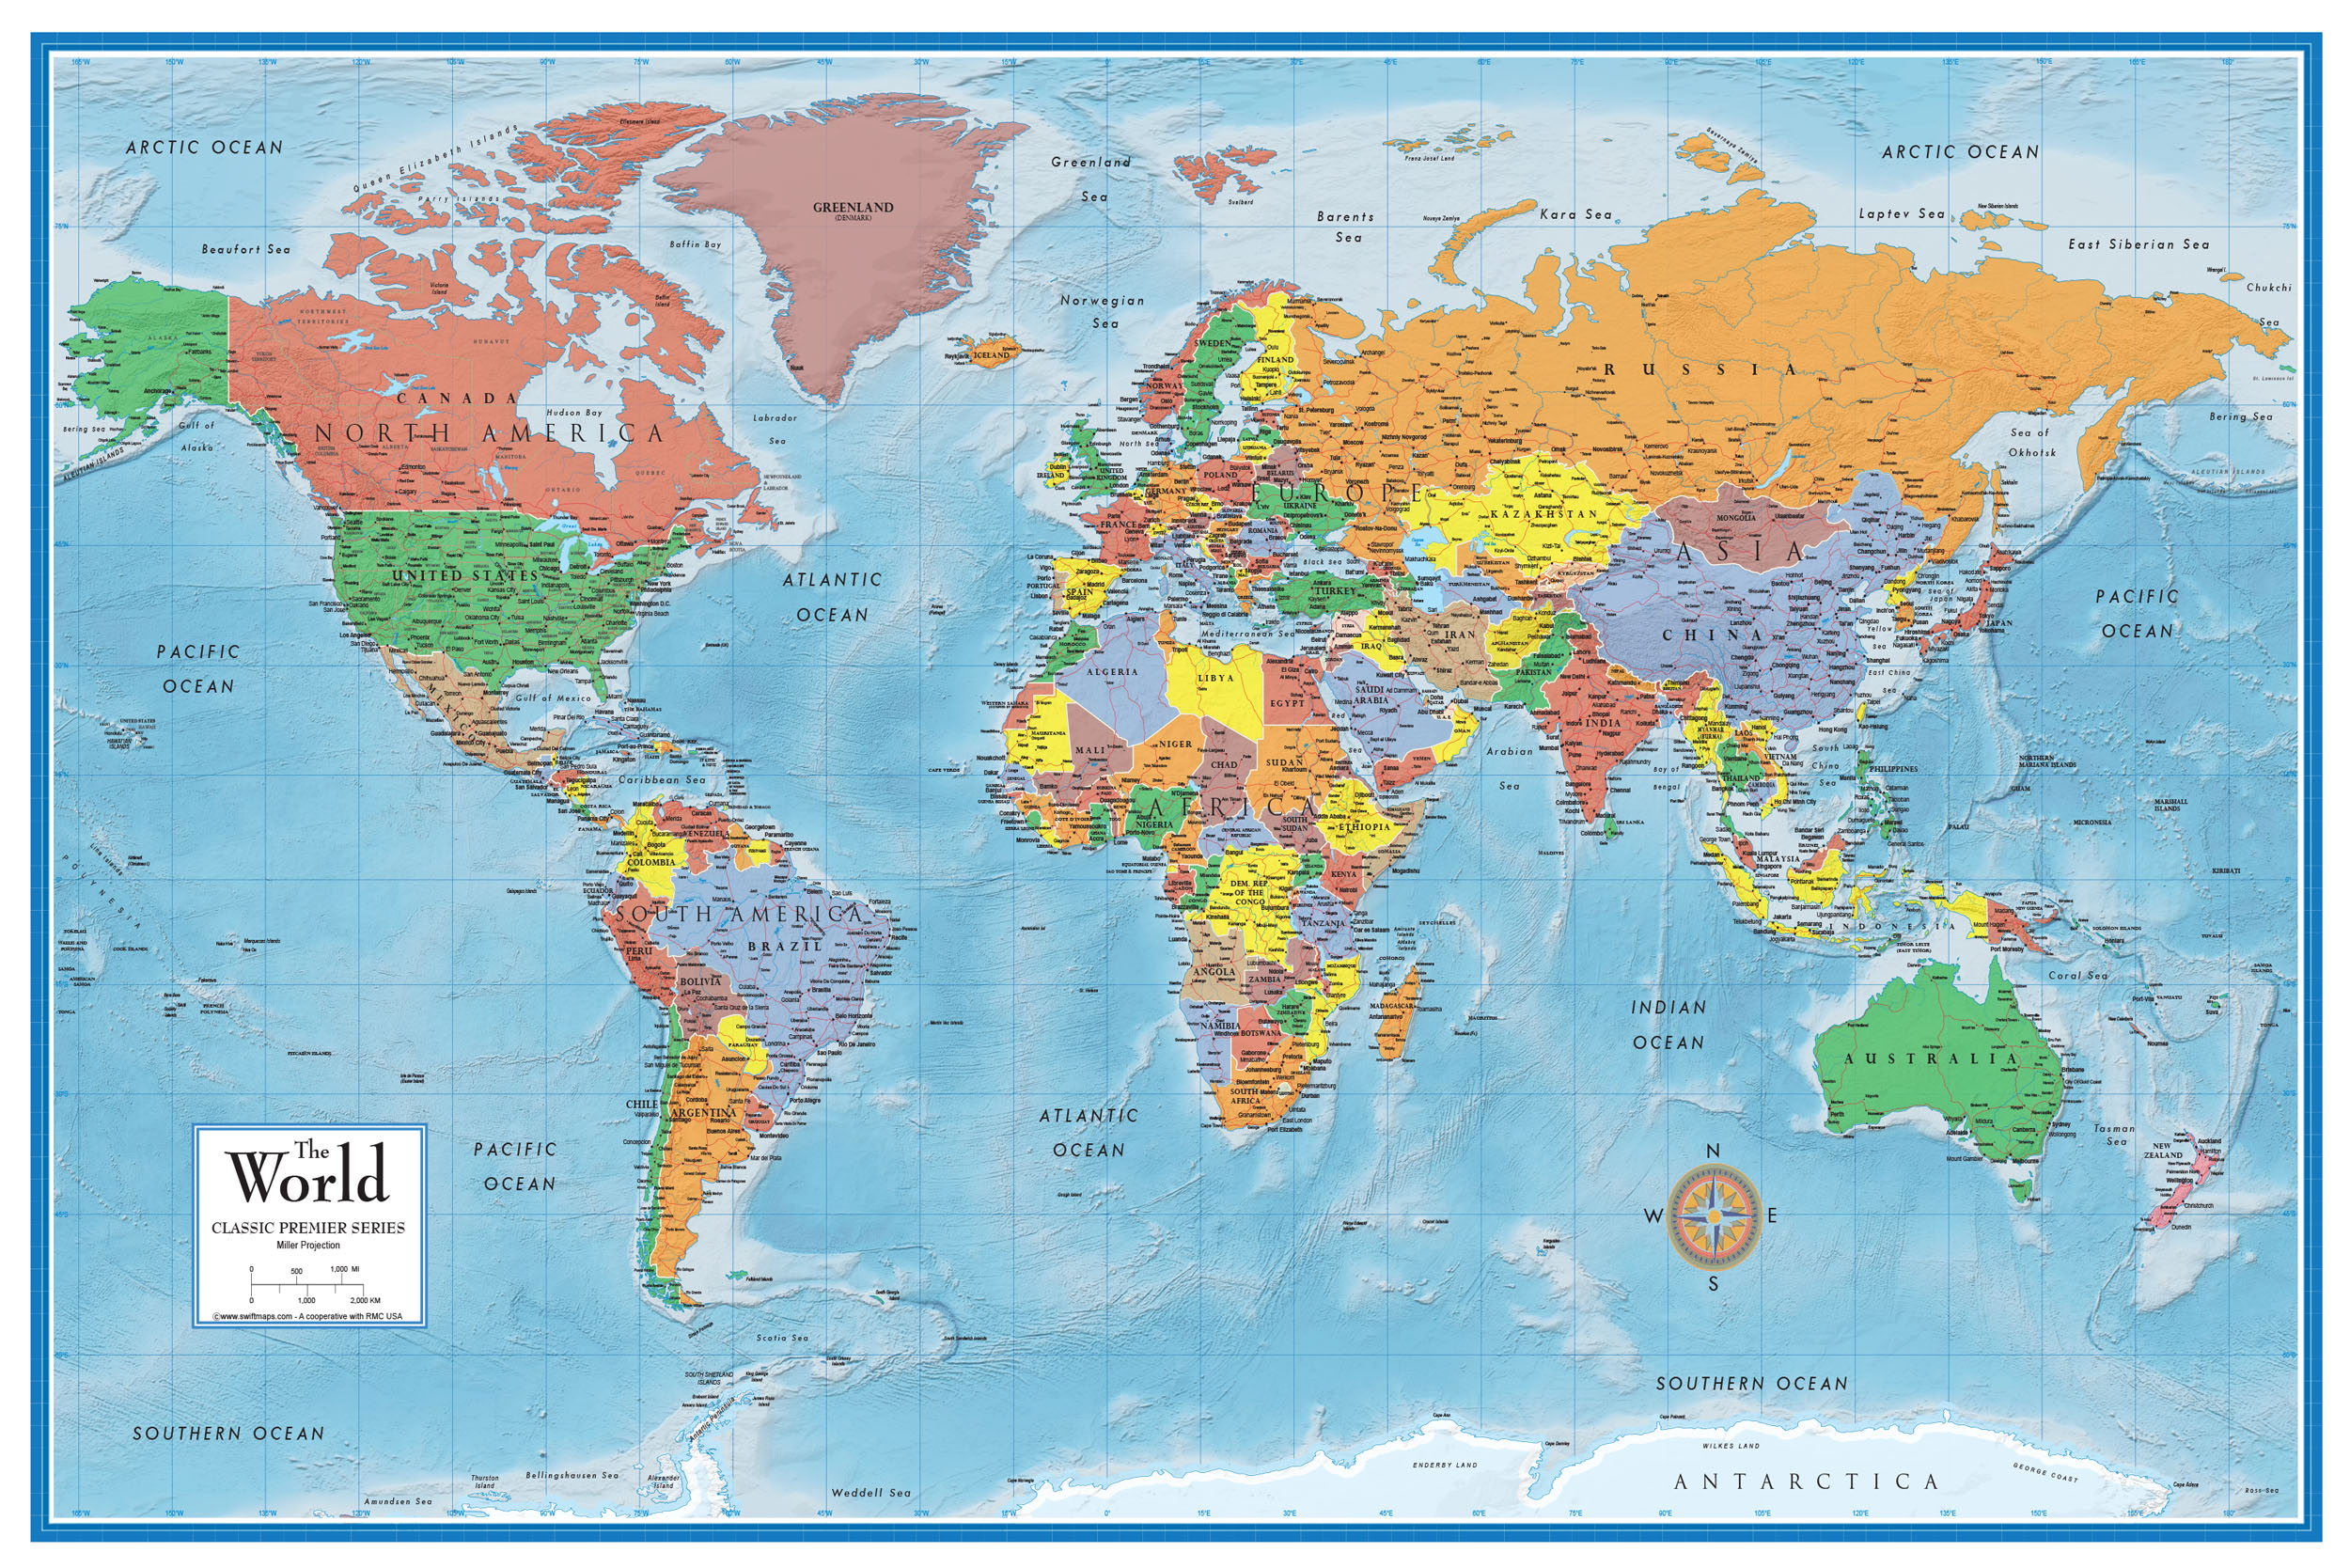 24x36 World Classic Premier 3D Wall Map Poster Paper Folded - image 1 of 4